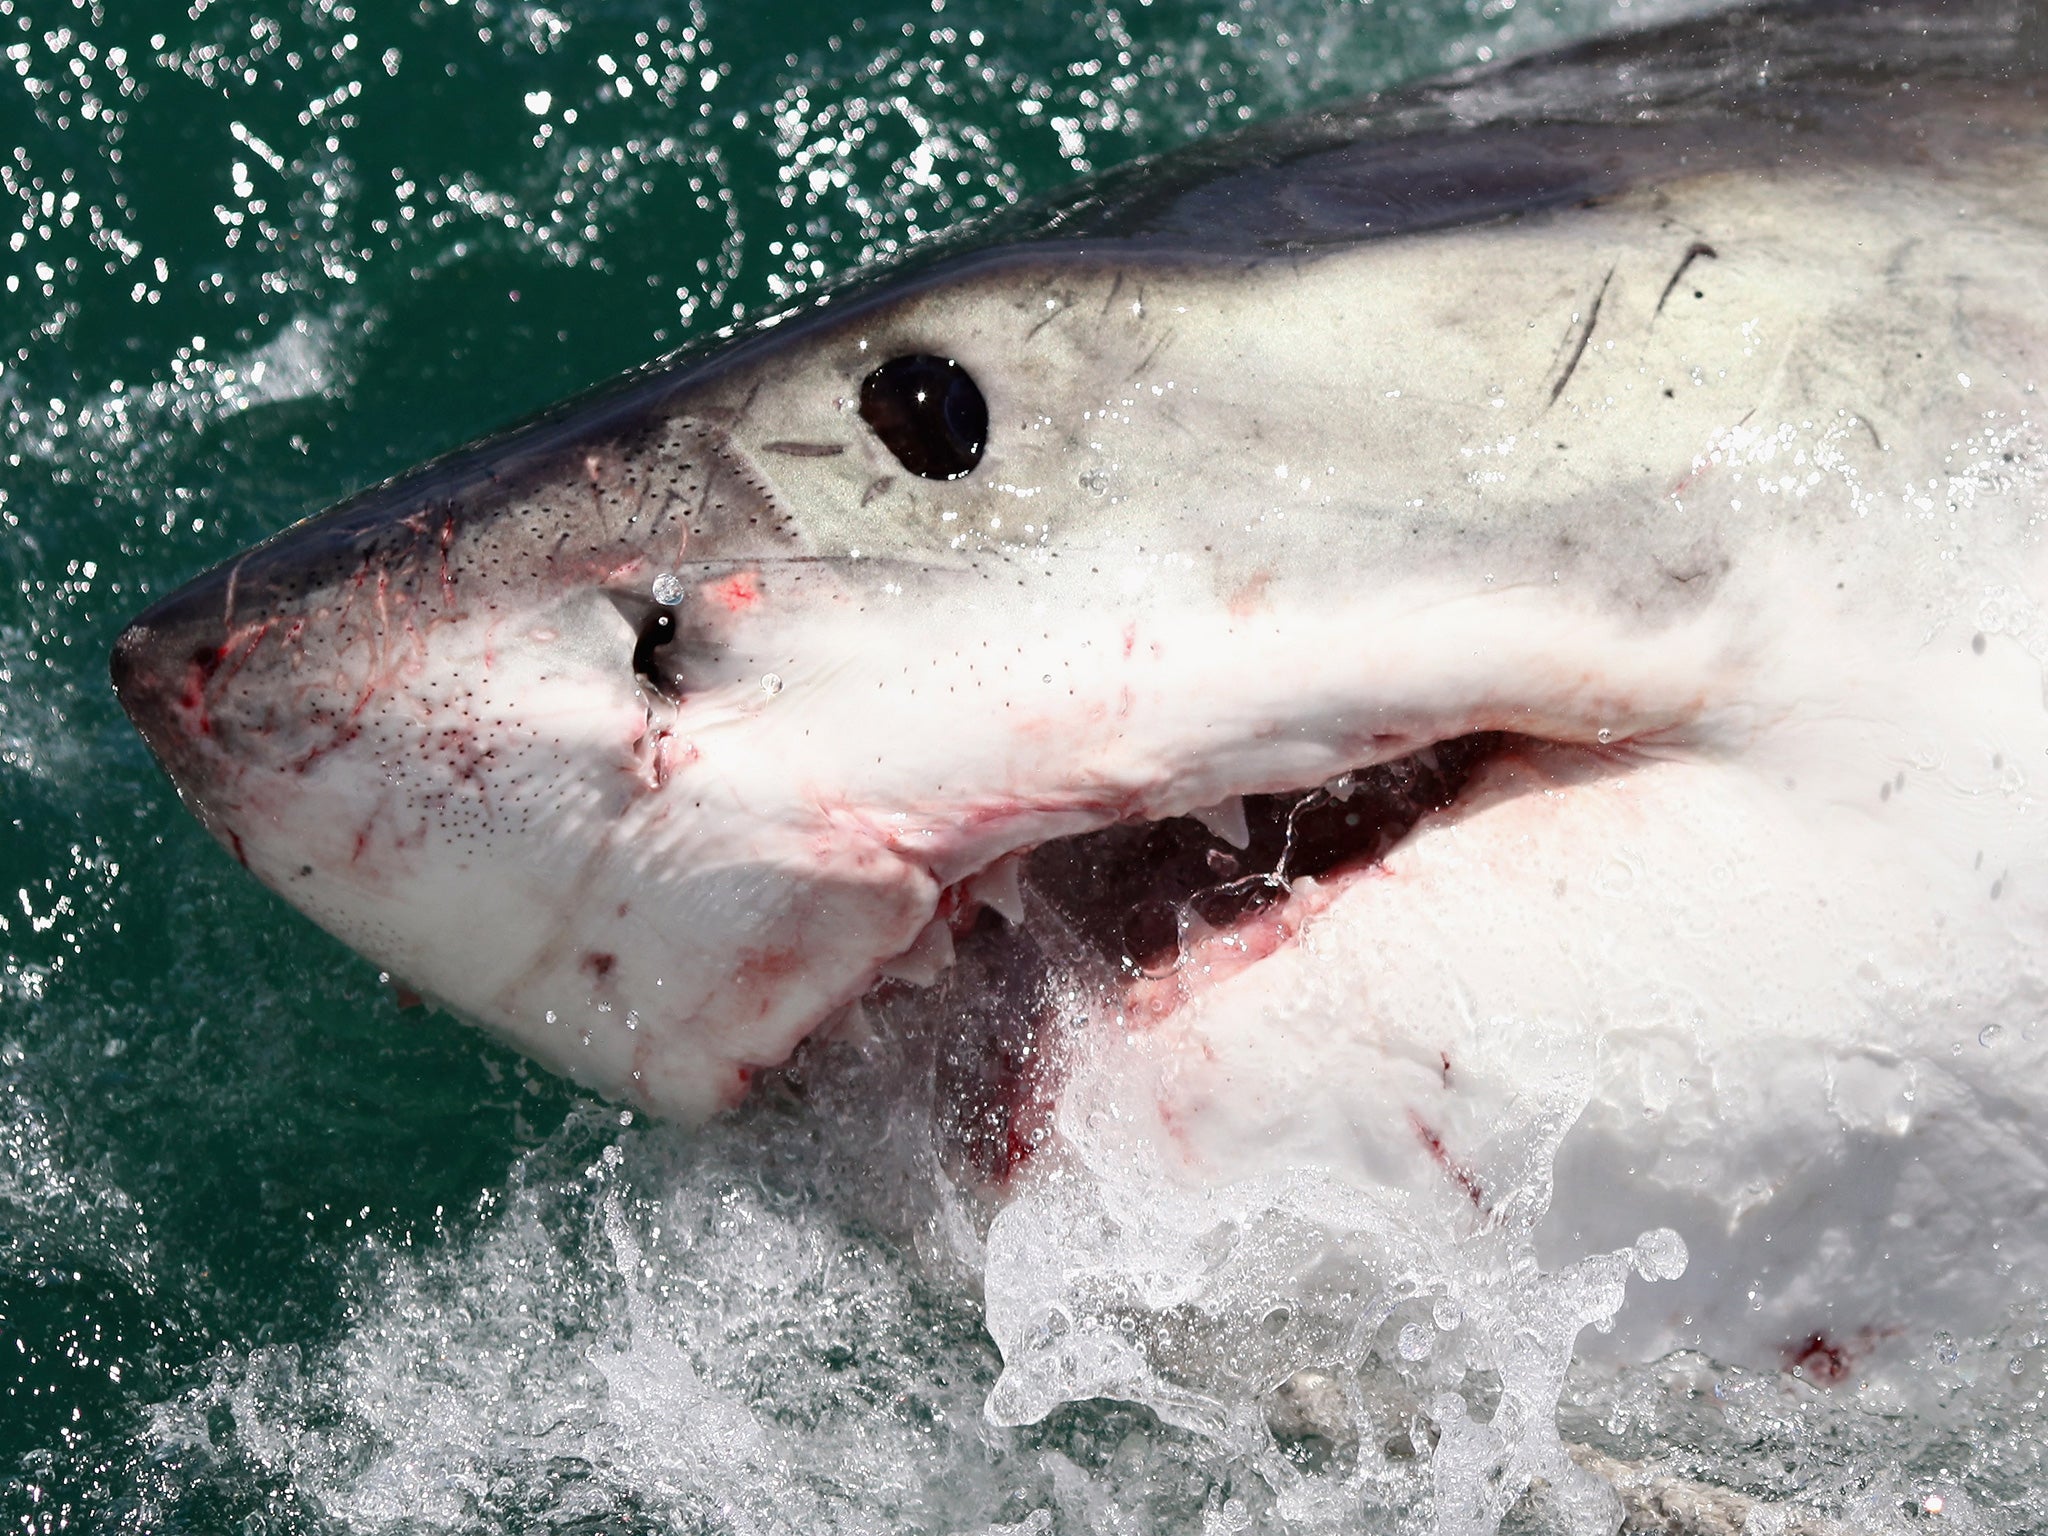 There has been another shark attack in North Carolina